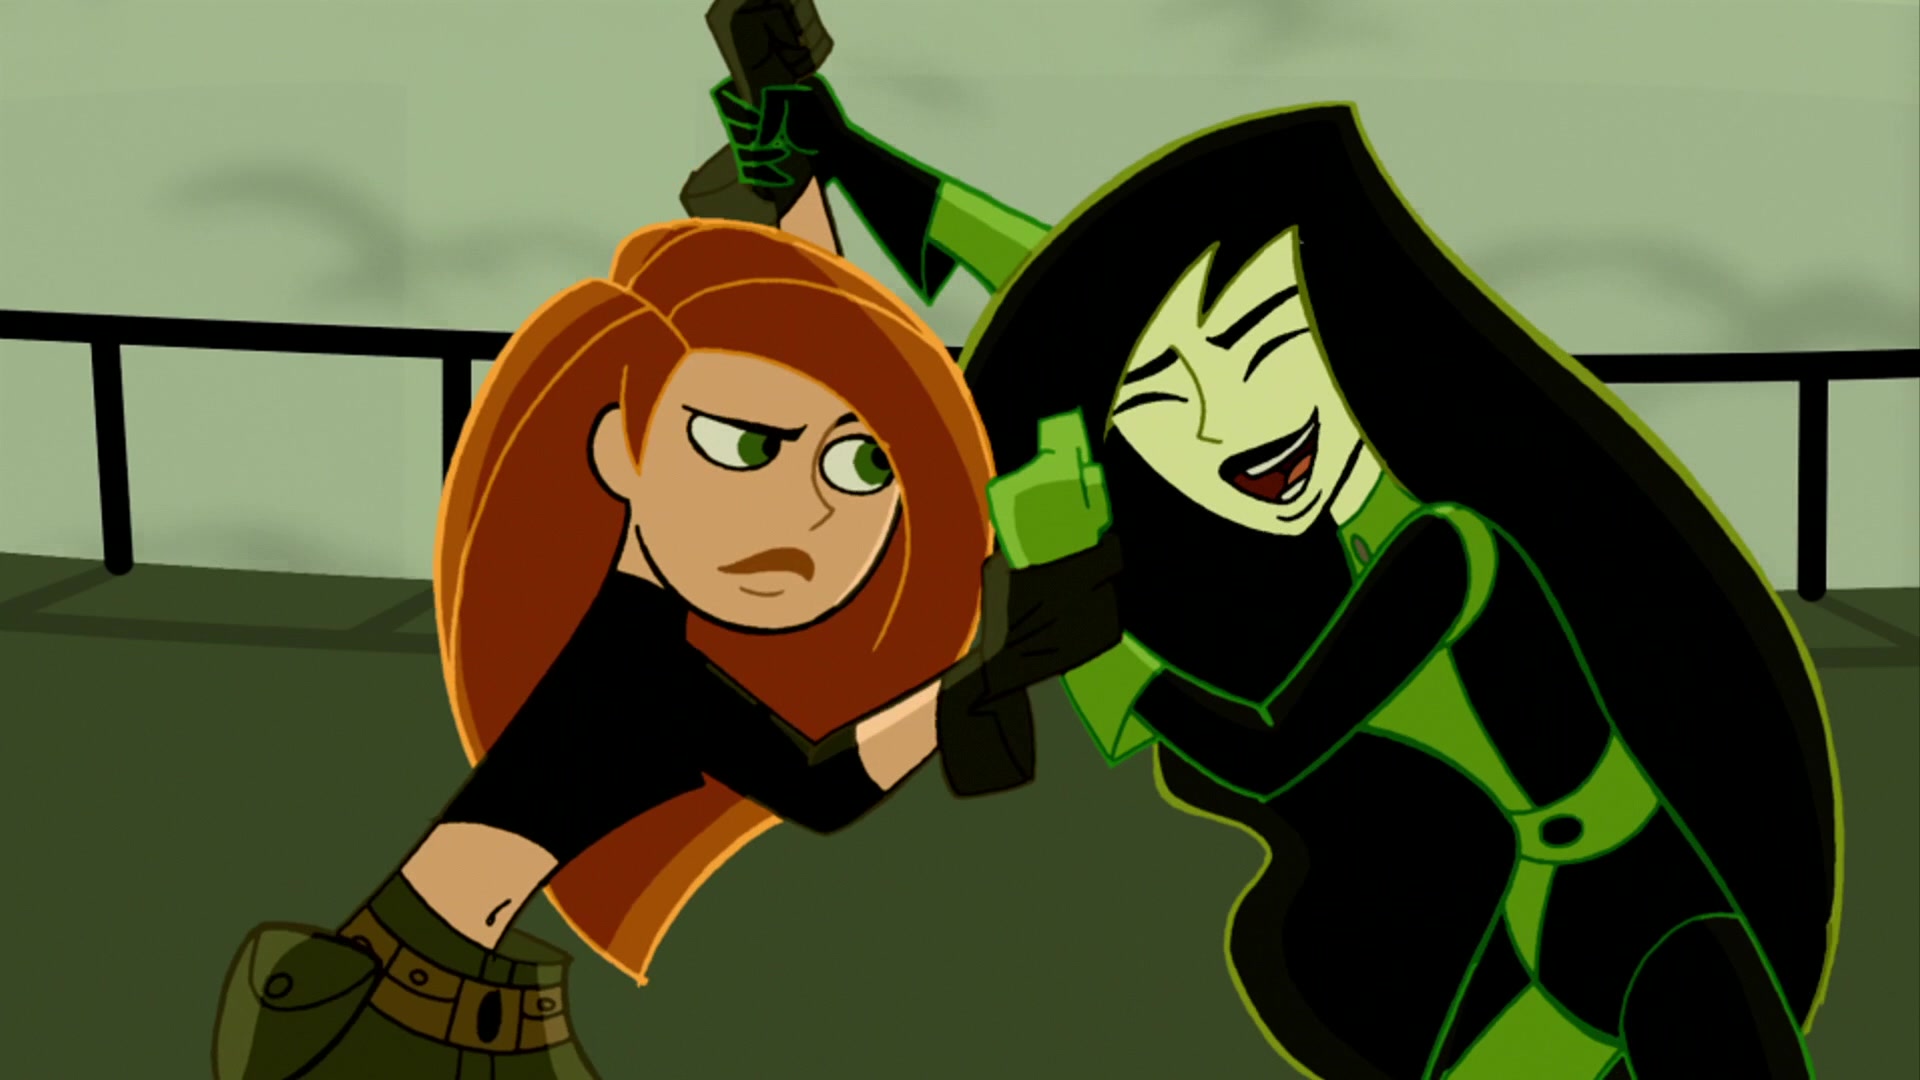 Free Kim Possible Porn Pics And Kim Possible Pictures 2